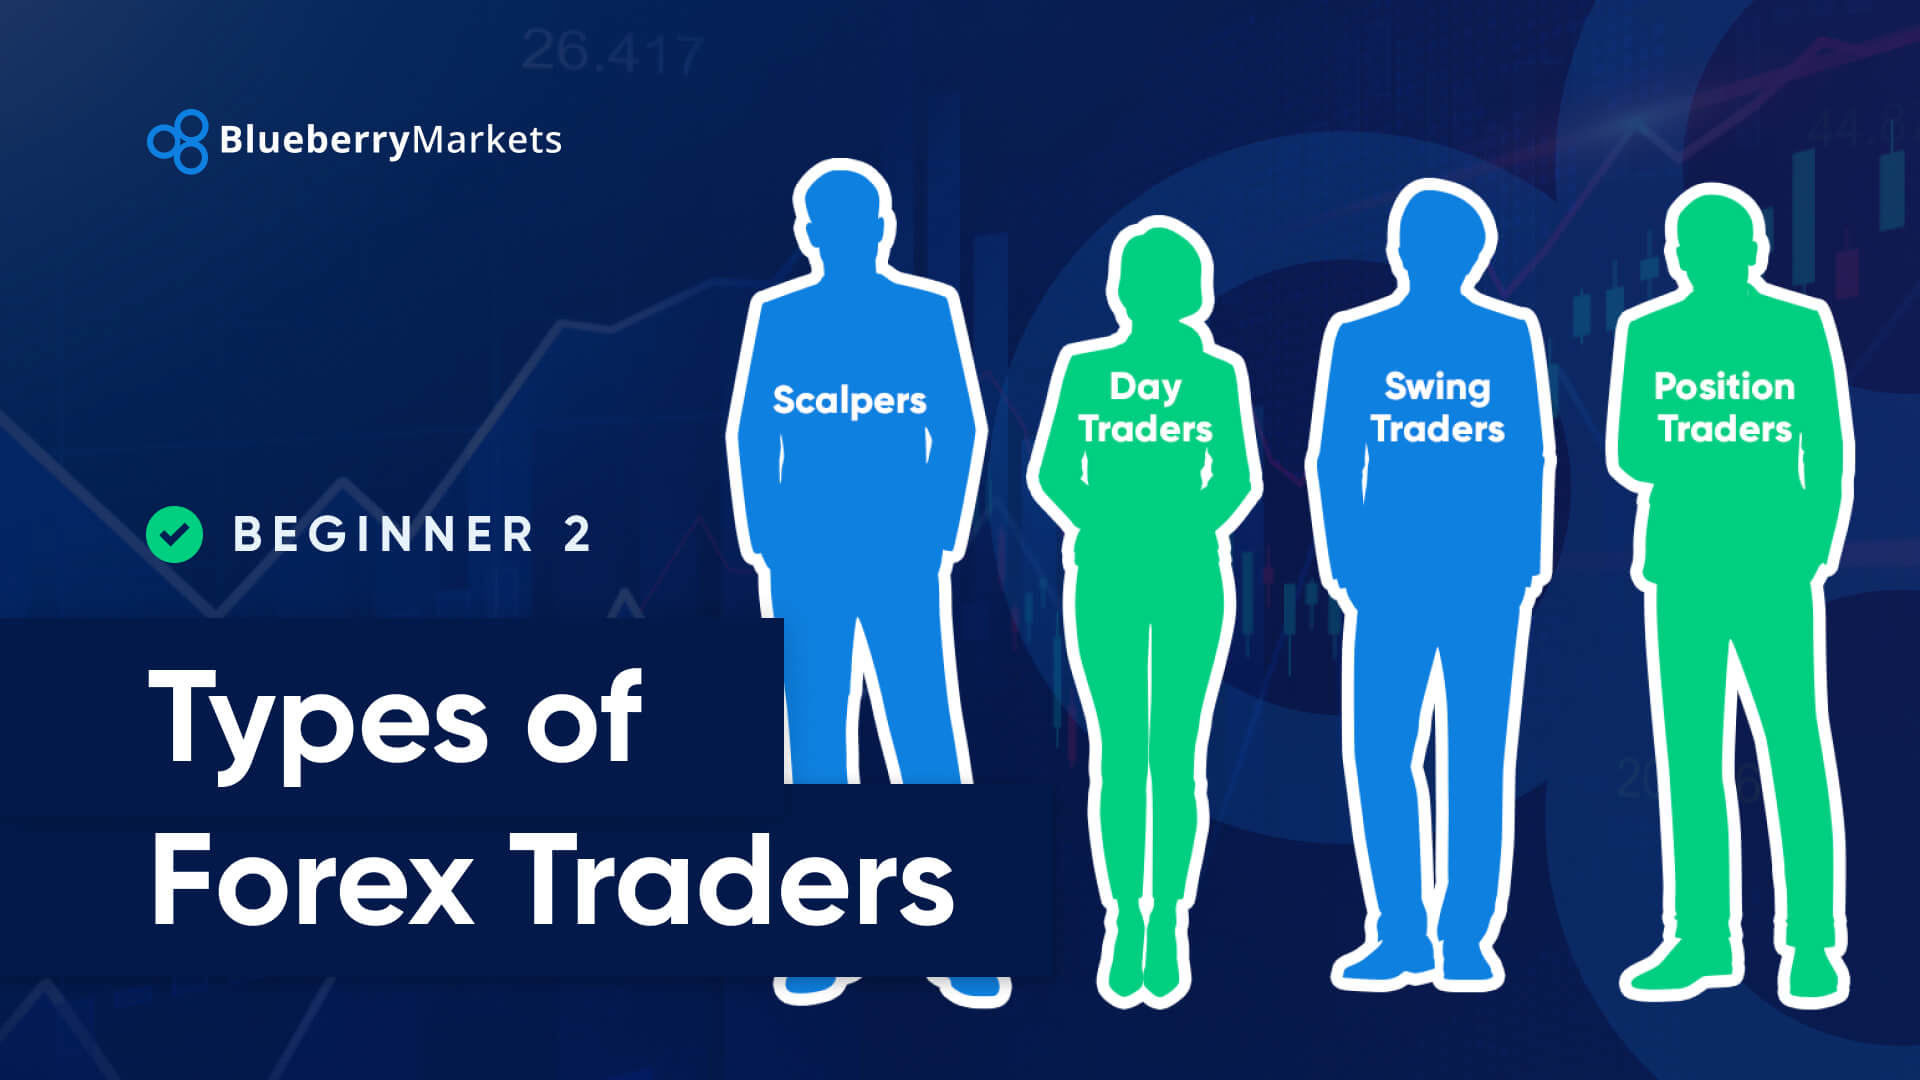 Types of Forex Traders